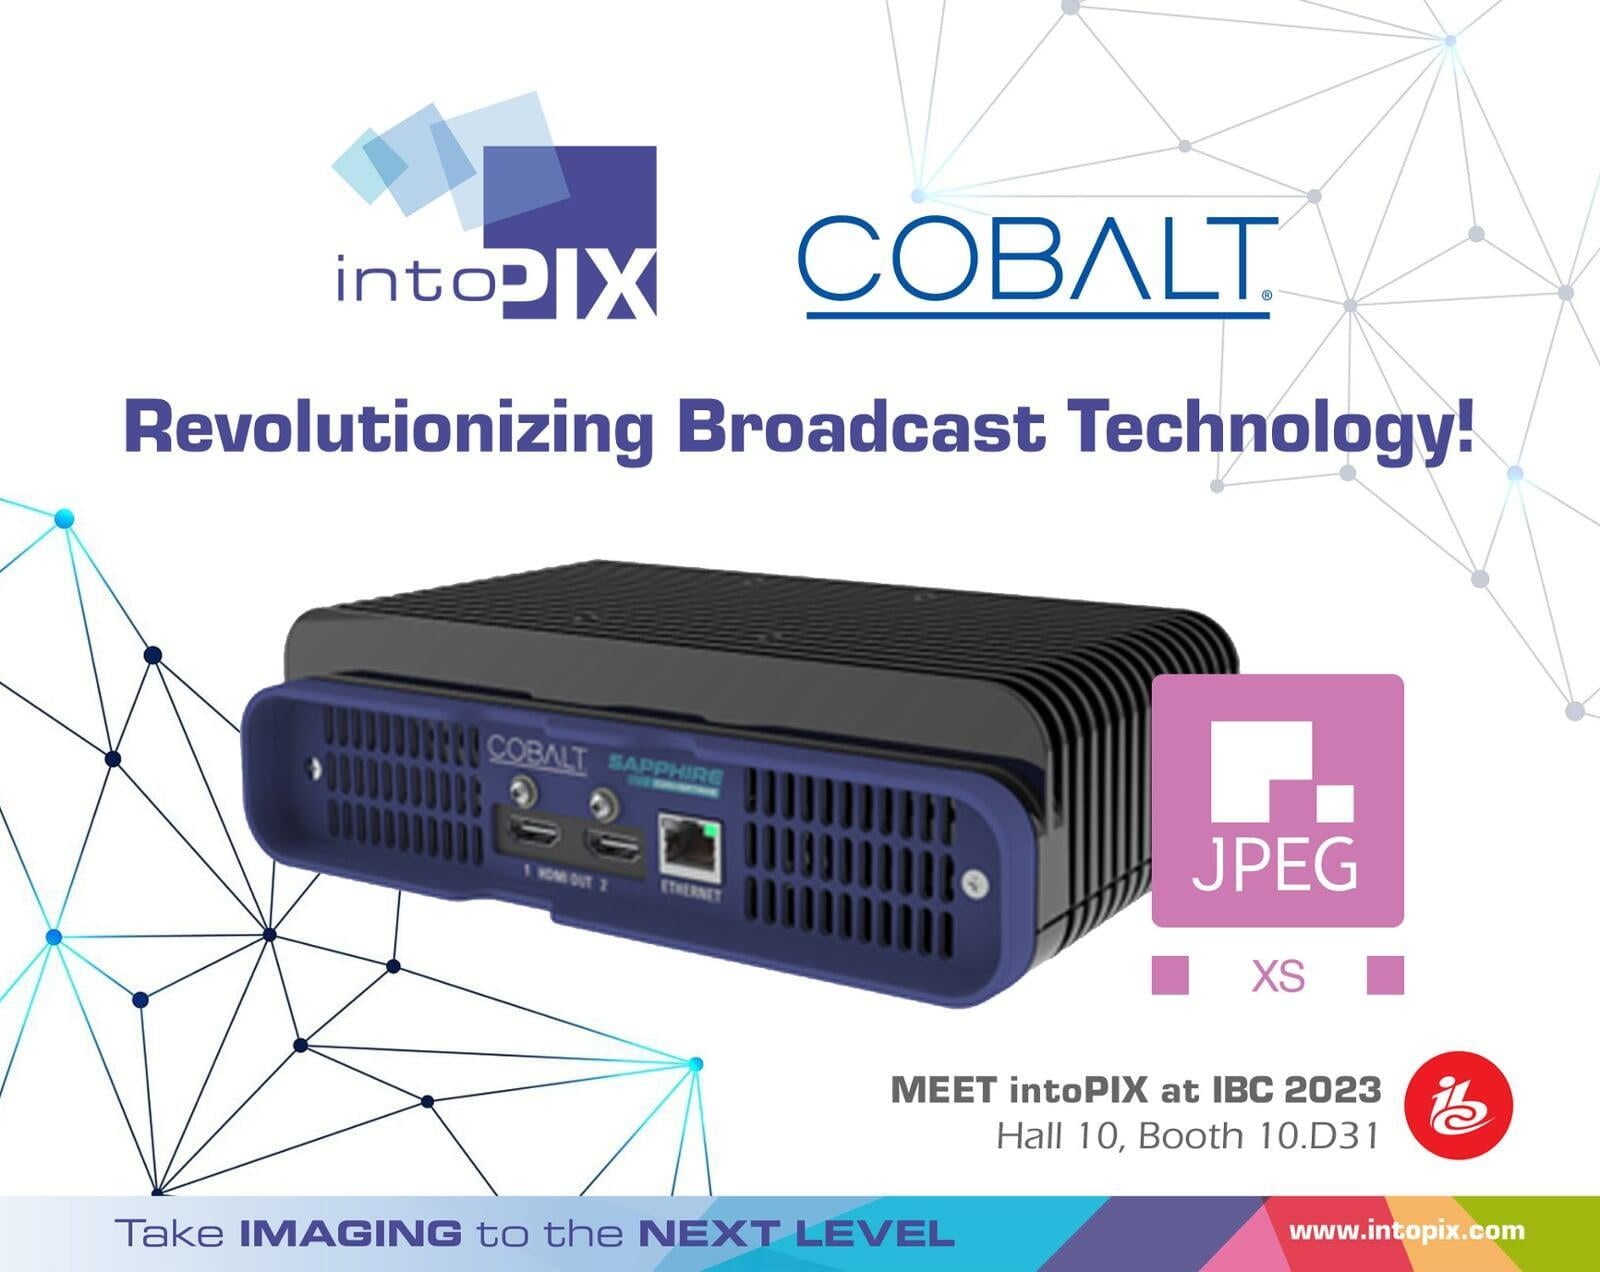 intoPIX and Cobalt unveil the future of content delivery with JPEG XS: Introducing the Sapphire mini-converters and Sapphire openGear card powered by intoPIX technology